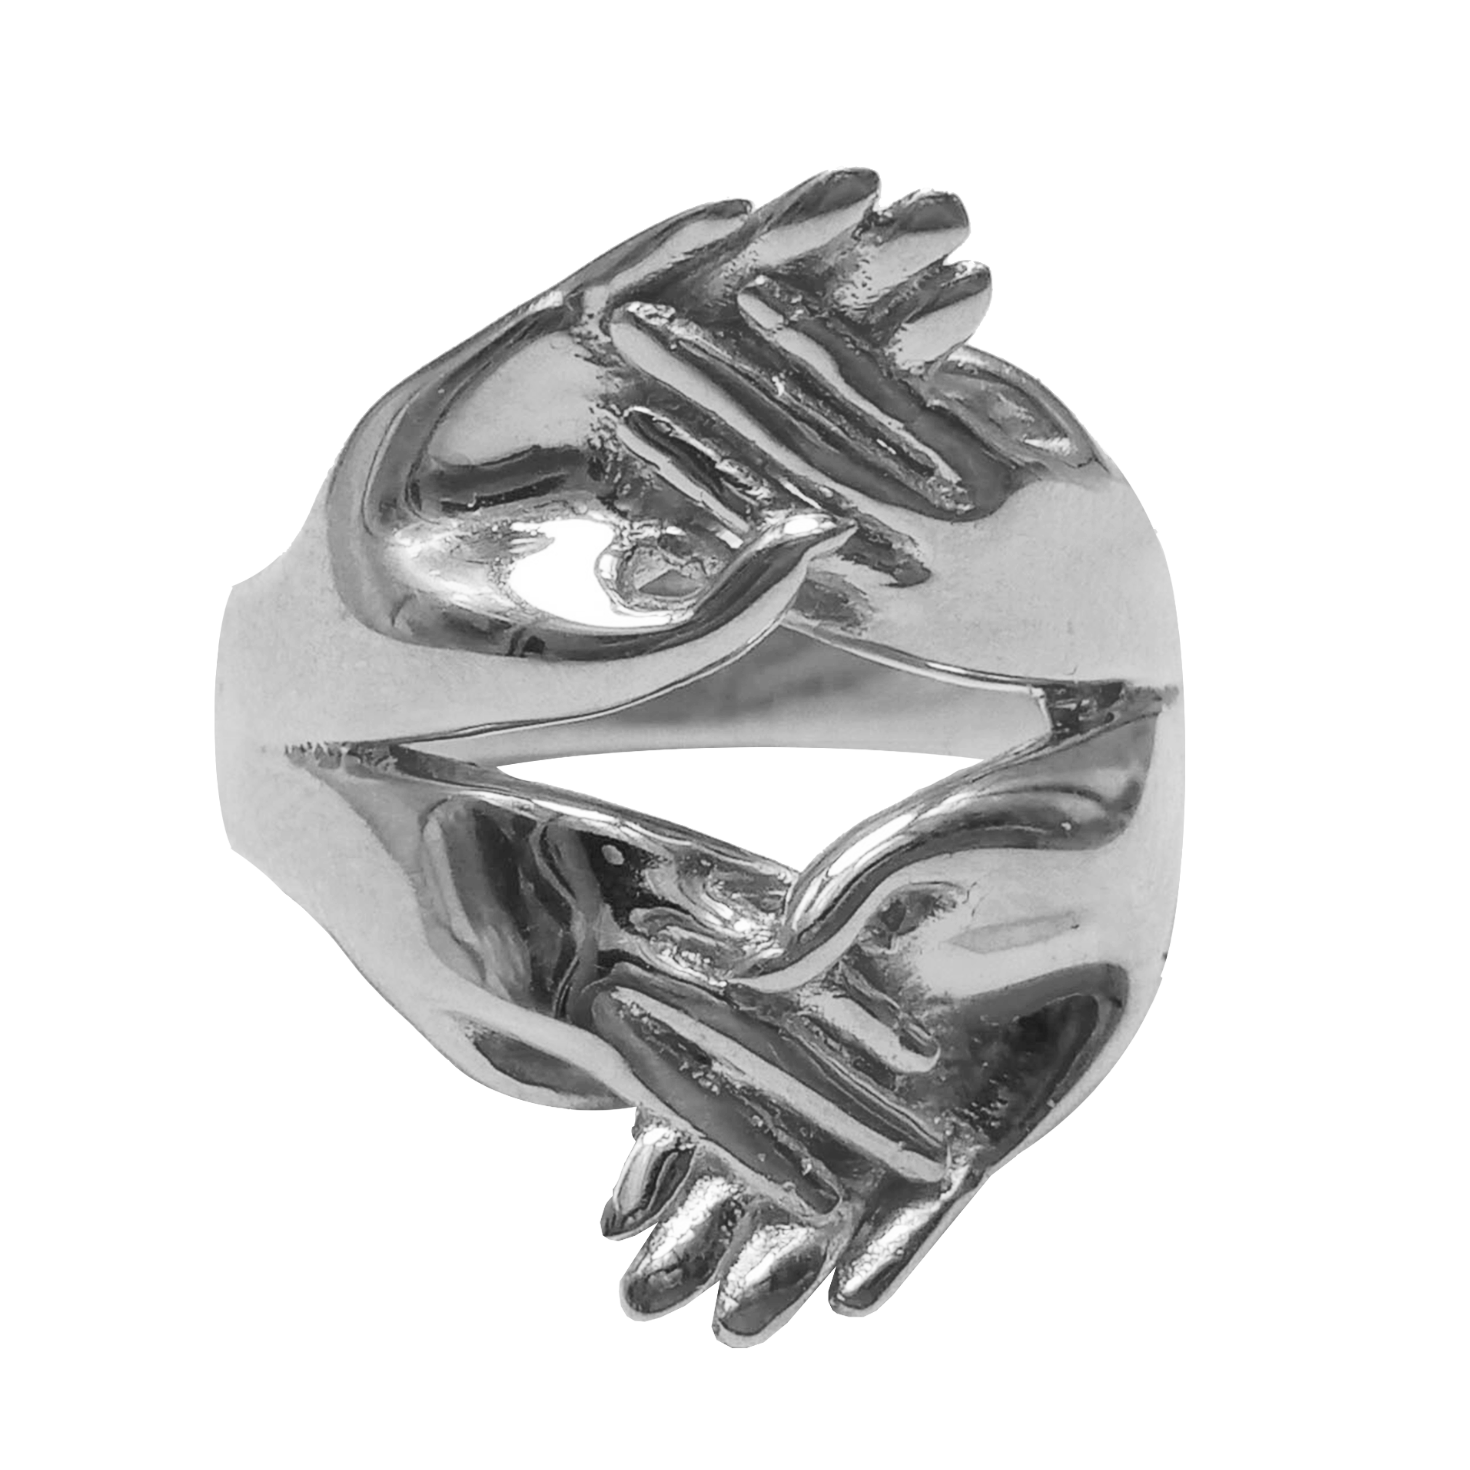 Buy Handshake Ring Sterling Silver Holding Hands Ring Thankyou Ring Online  in India - Etsy